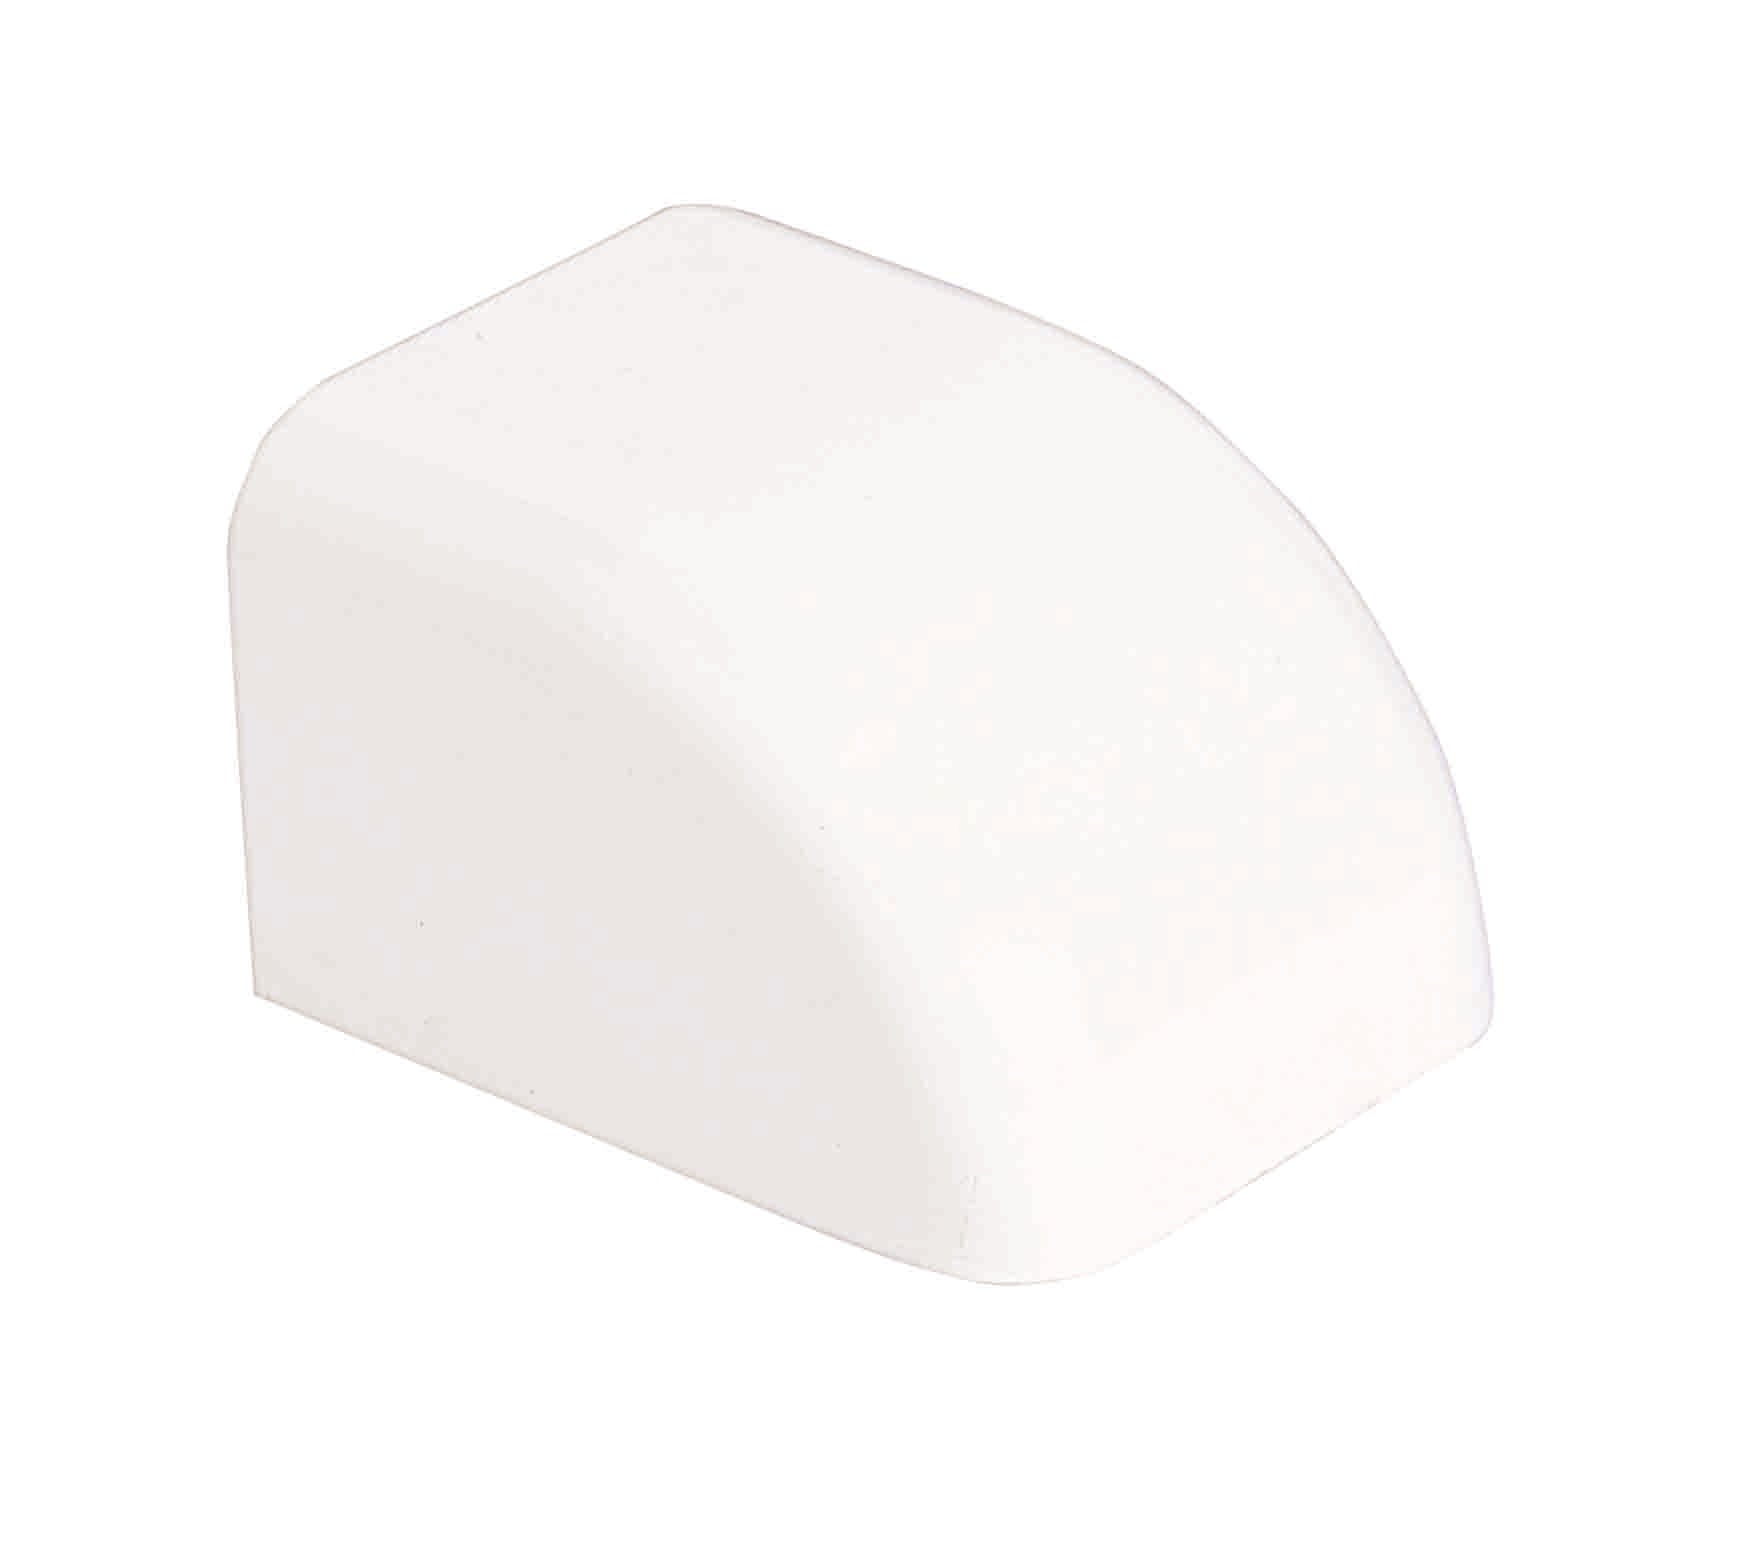 TAPON FINAL CANAL CLIMA 90X65MM BLANCO